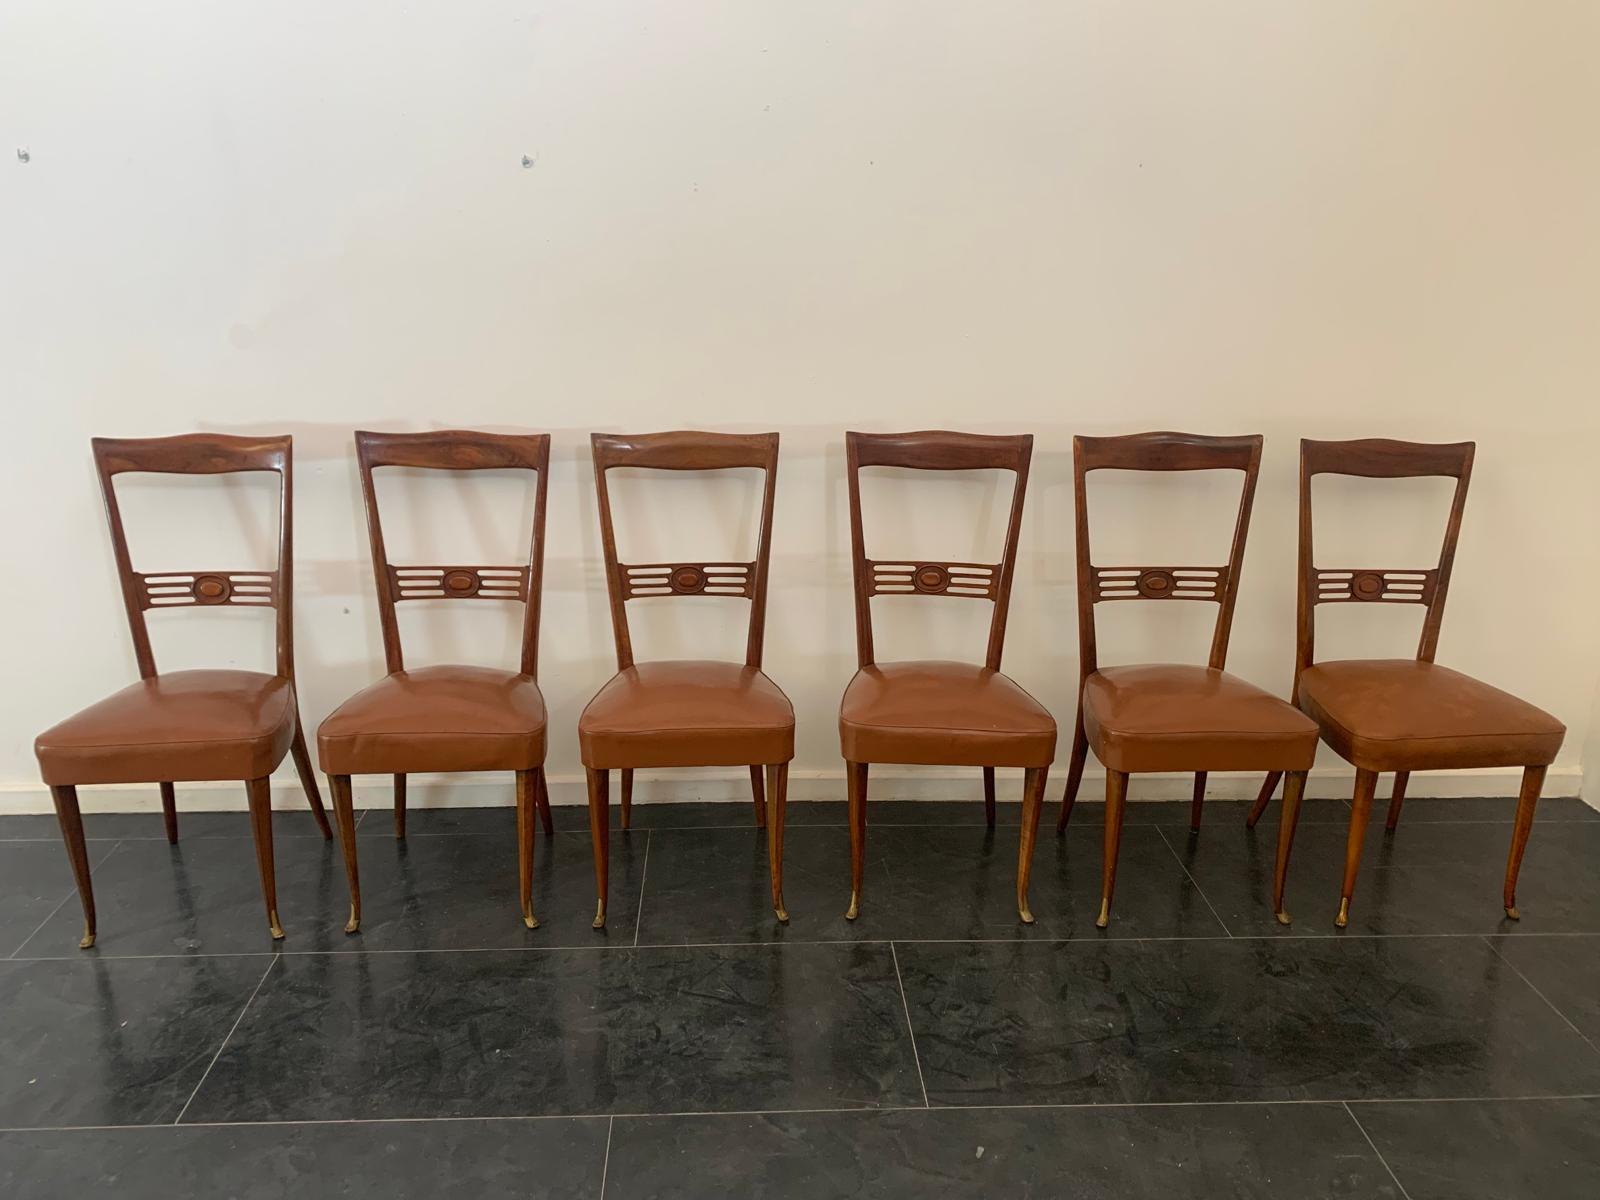 Excellent cabinet making for these 6 solid rosewood chairs. The 2 front legs are trimmed like a saber ending in feline tips in gilded bronze, the backrest runs in the center with three parallel lines which centrally accommodate a finely carved oval,